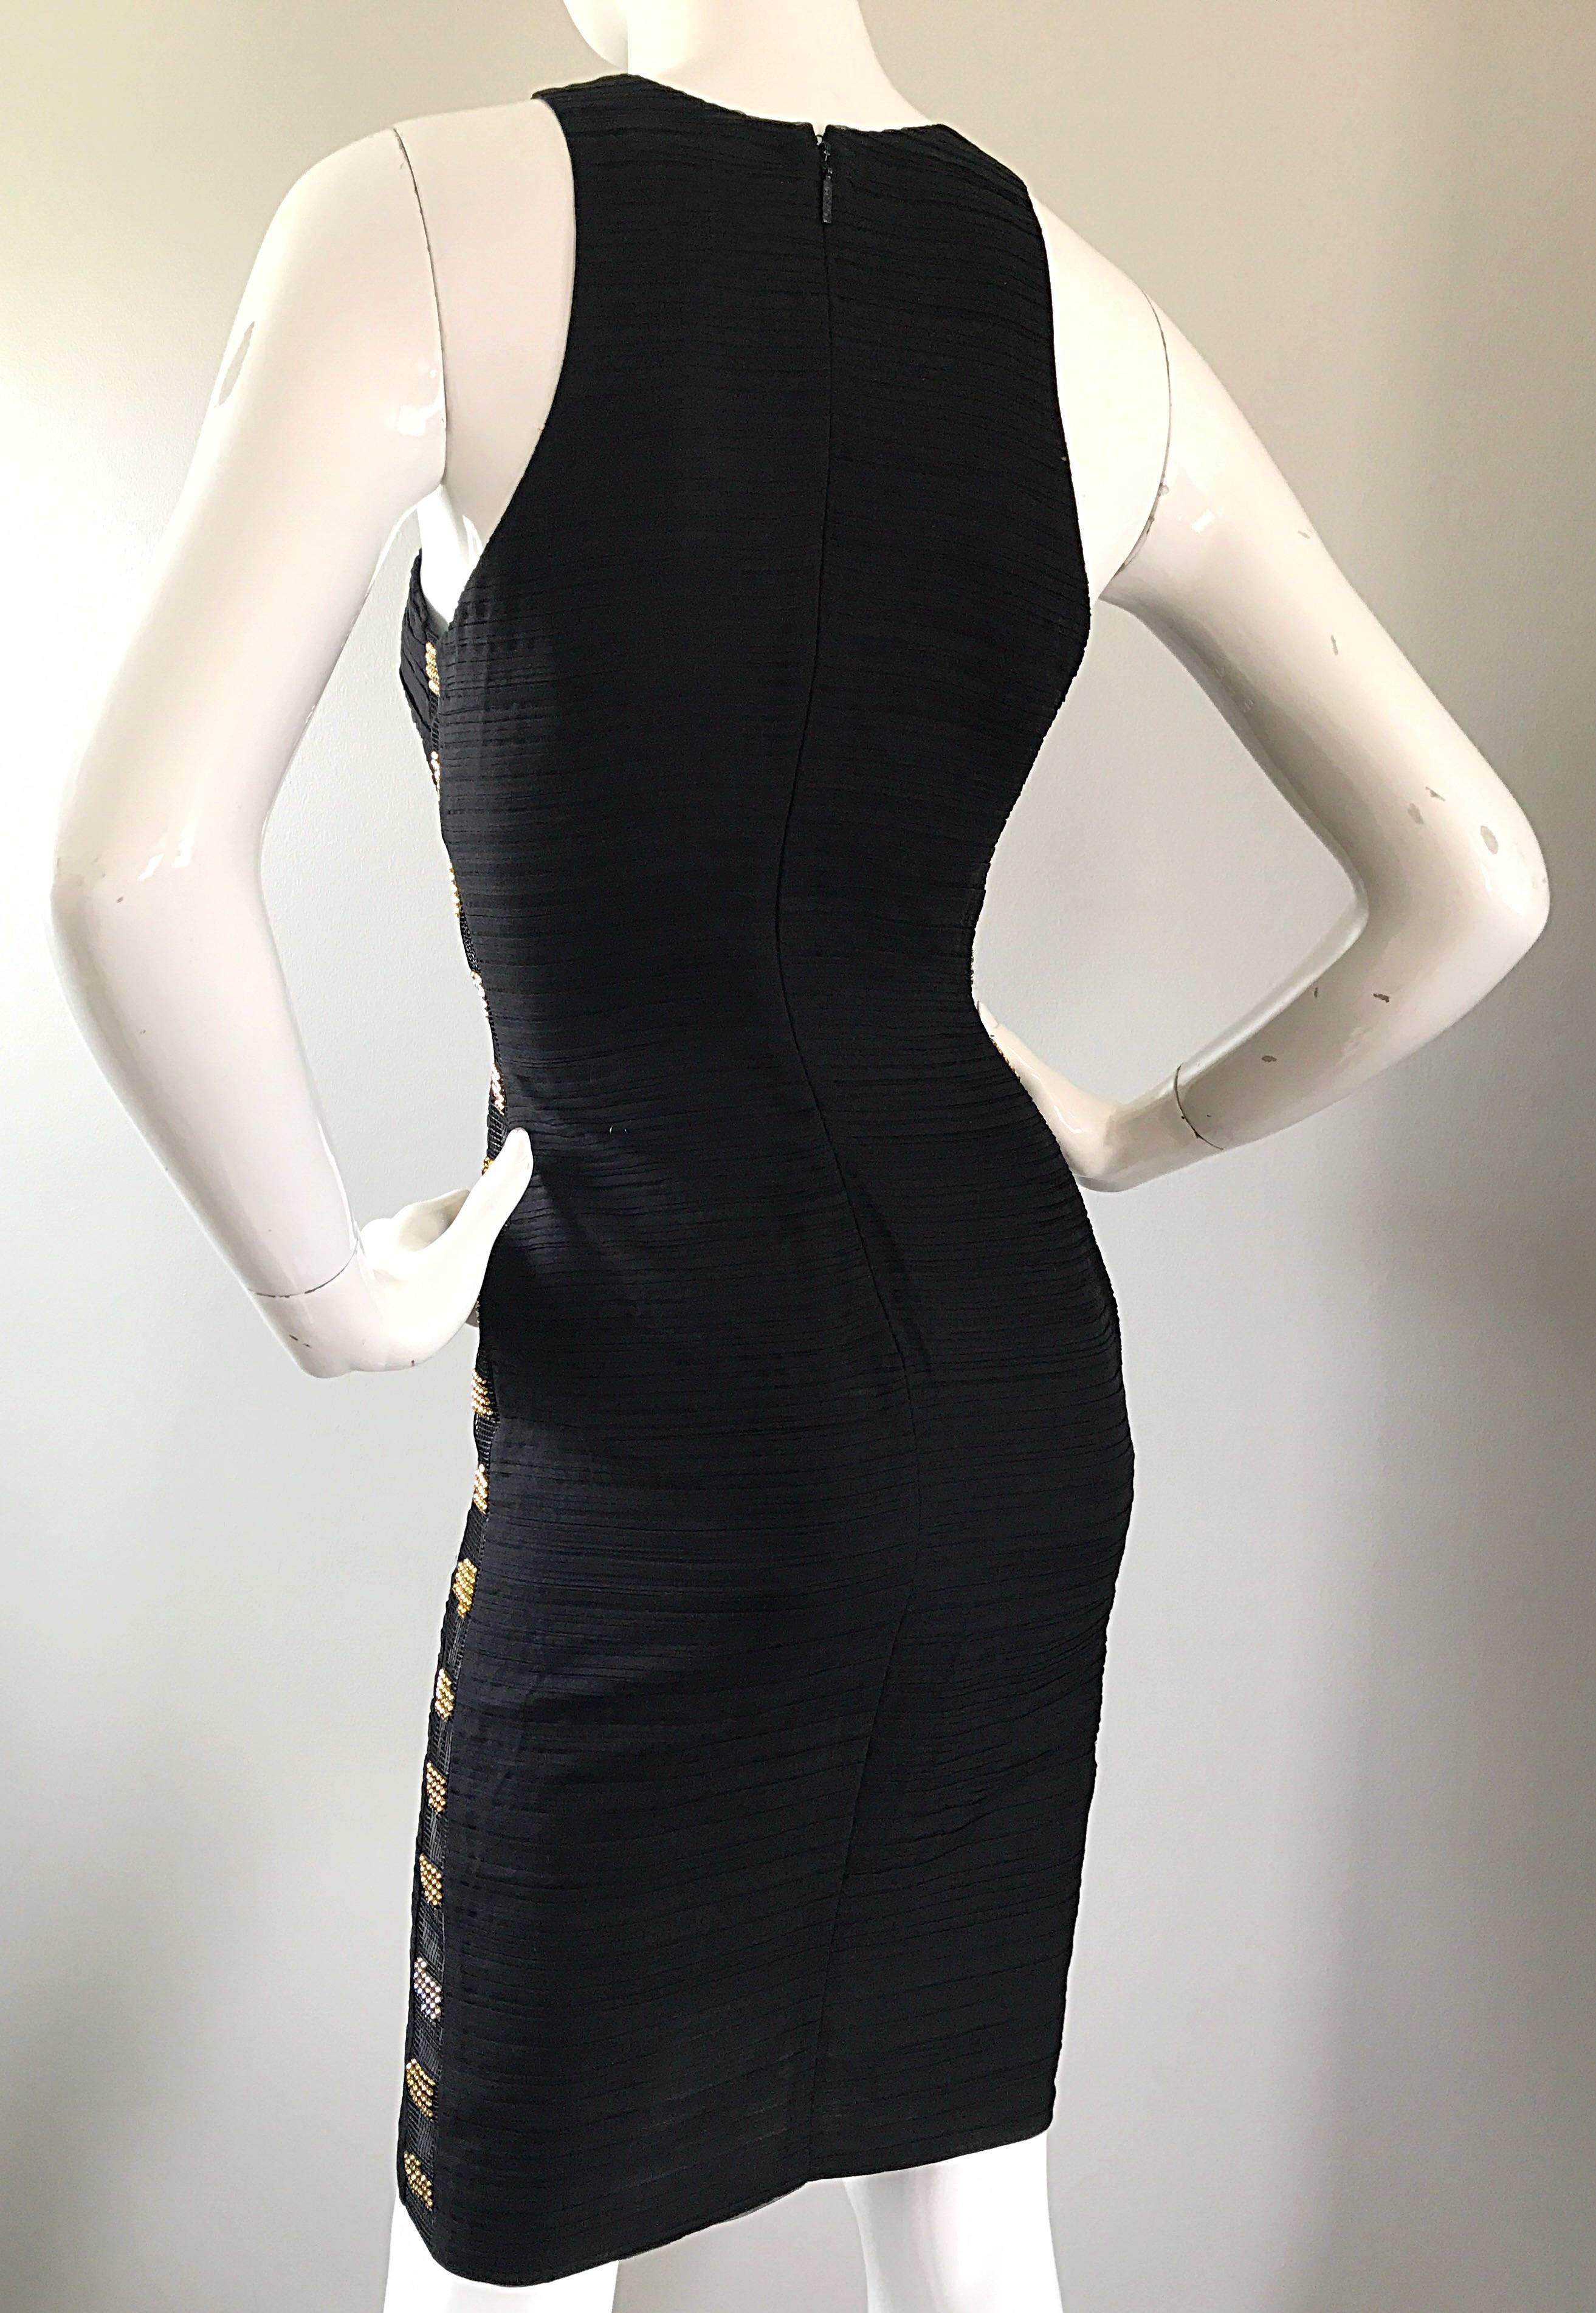 2000s Gianni Versace Black Silk Side Cut Out Rhinestone Bodycon Vintage Dress  For Sale 1